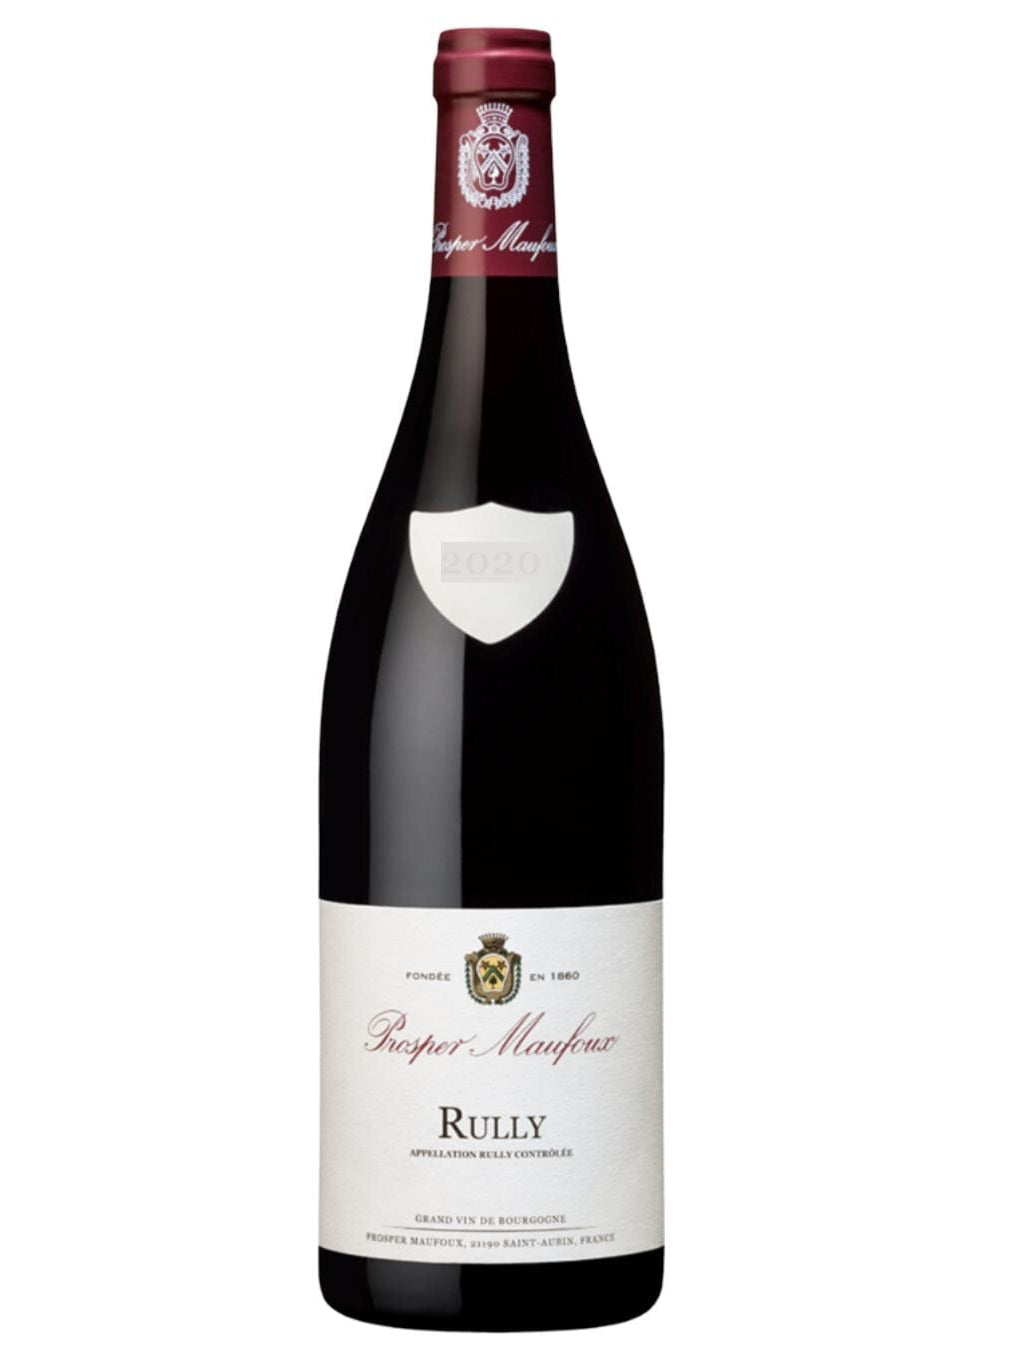 Shop Domaine Prosper Moufoux Domaine Prosper Maufoux Rully Rouge 2020 online at PENTICTON artisanal French wine store in Hong Kong. Discover other French wines, promotions, workshops and featured offers at pentictonpacific.com 